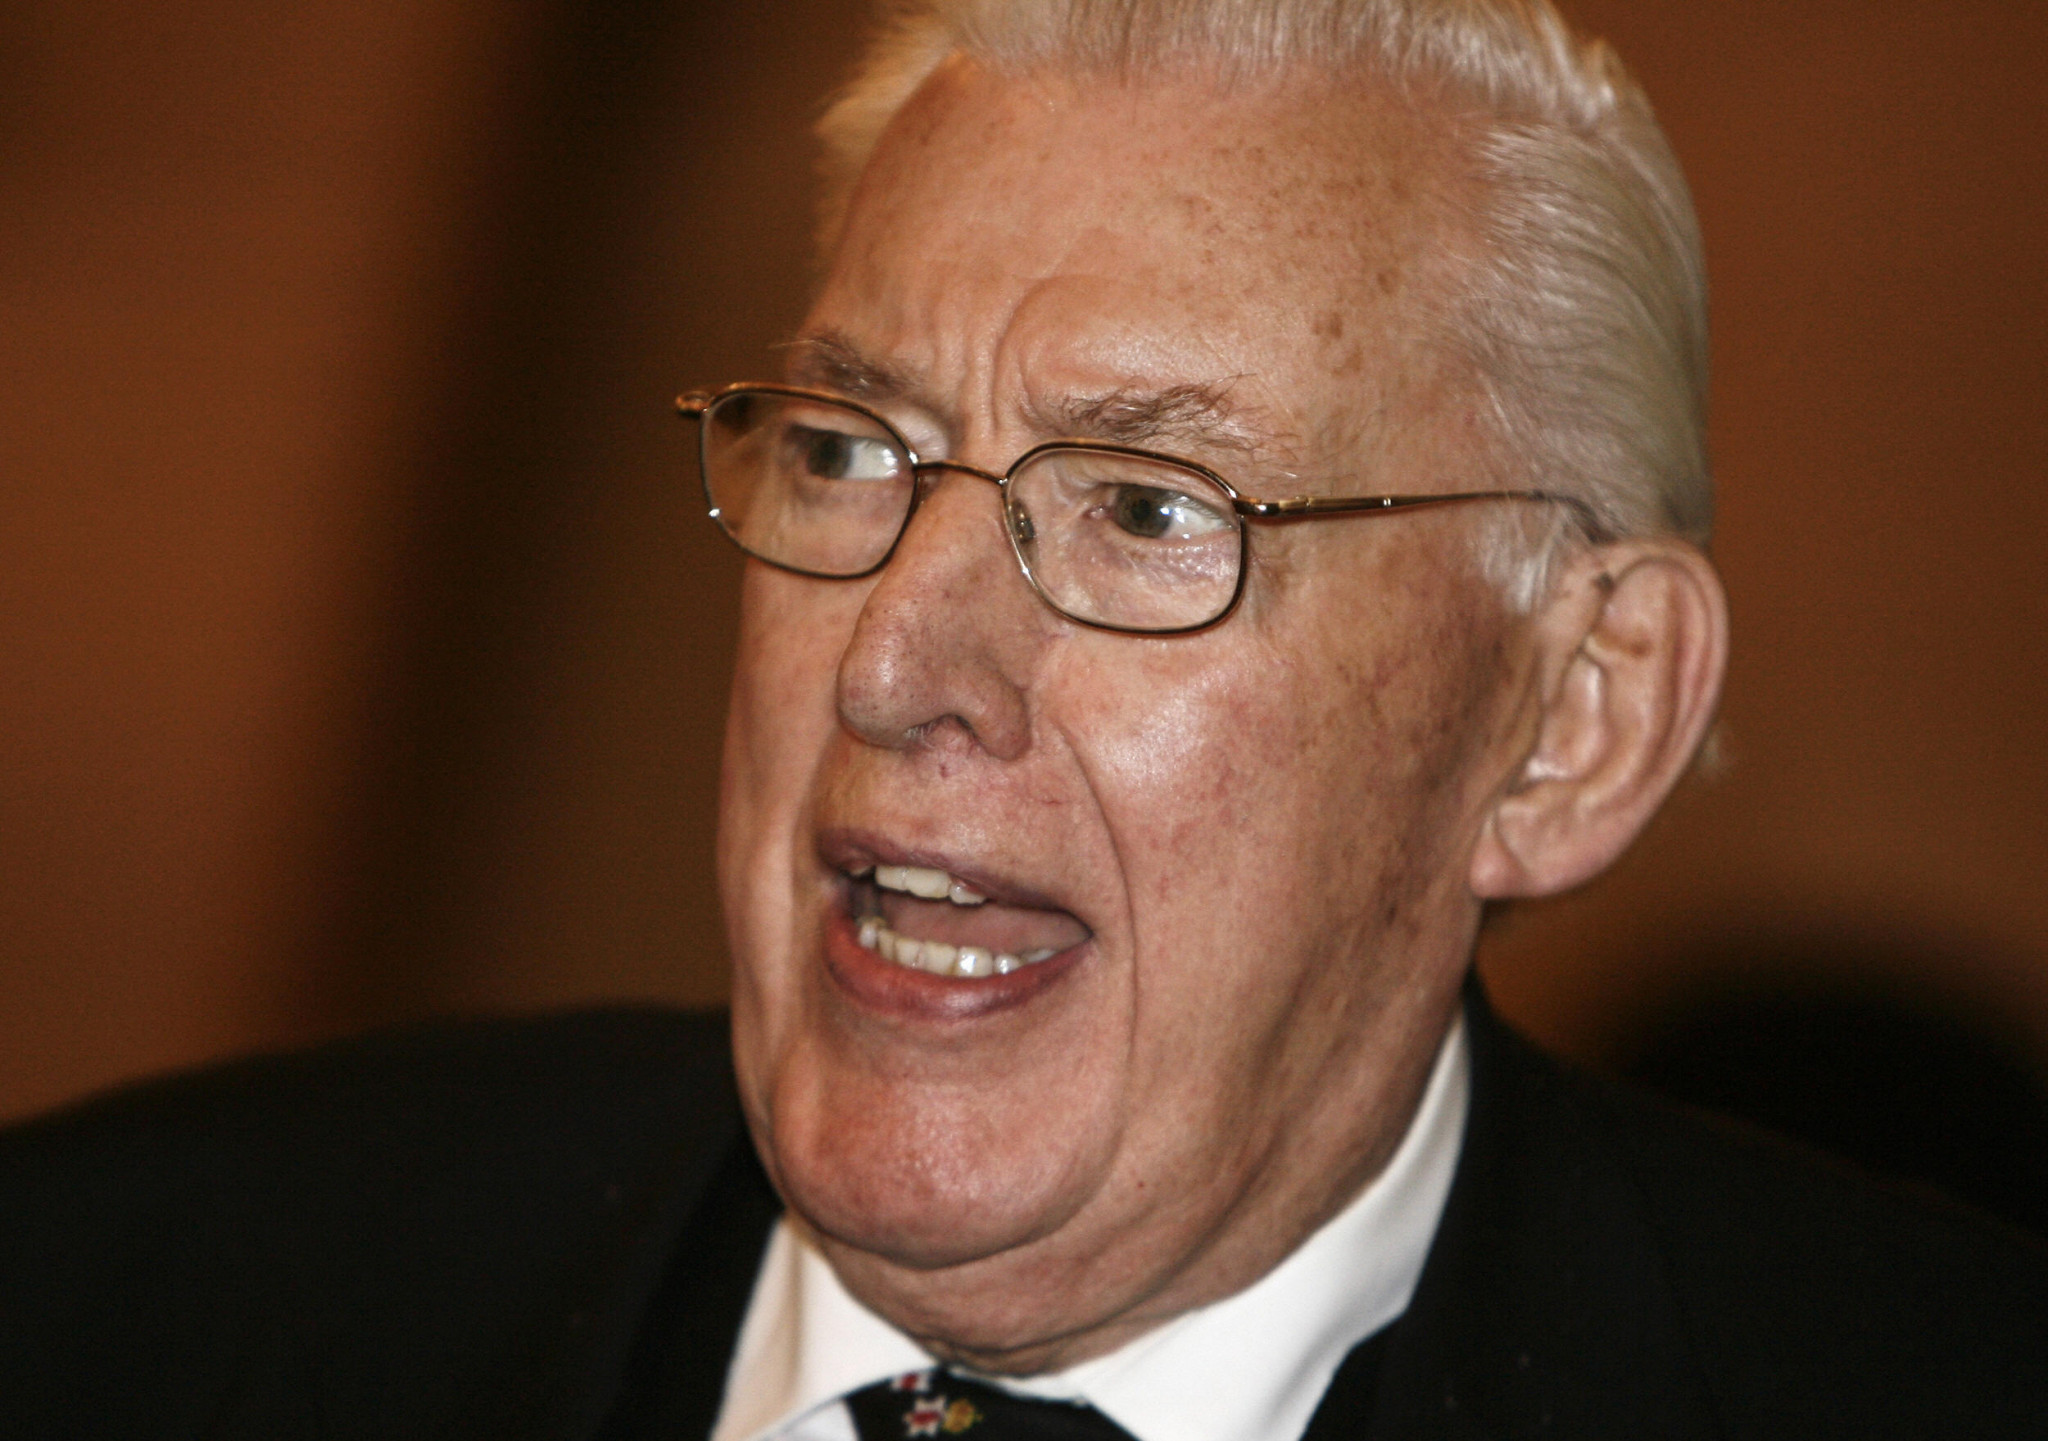 Our columnist's trips to Northern Ireland included meeting political leaders such as Reverend Ian Paisley ©Getty Images